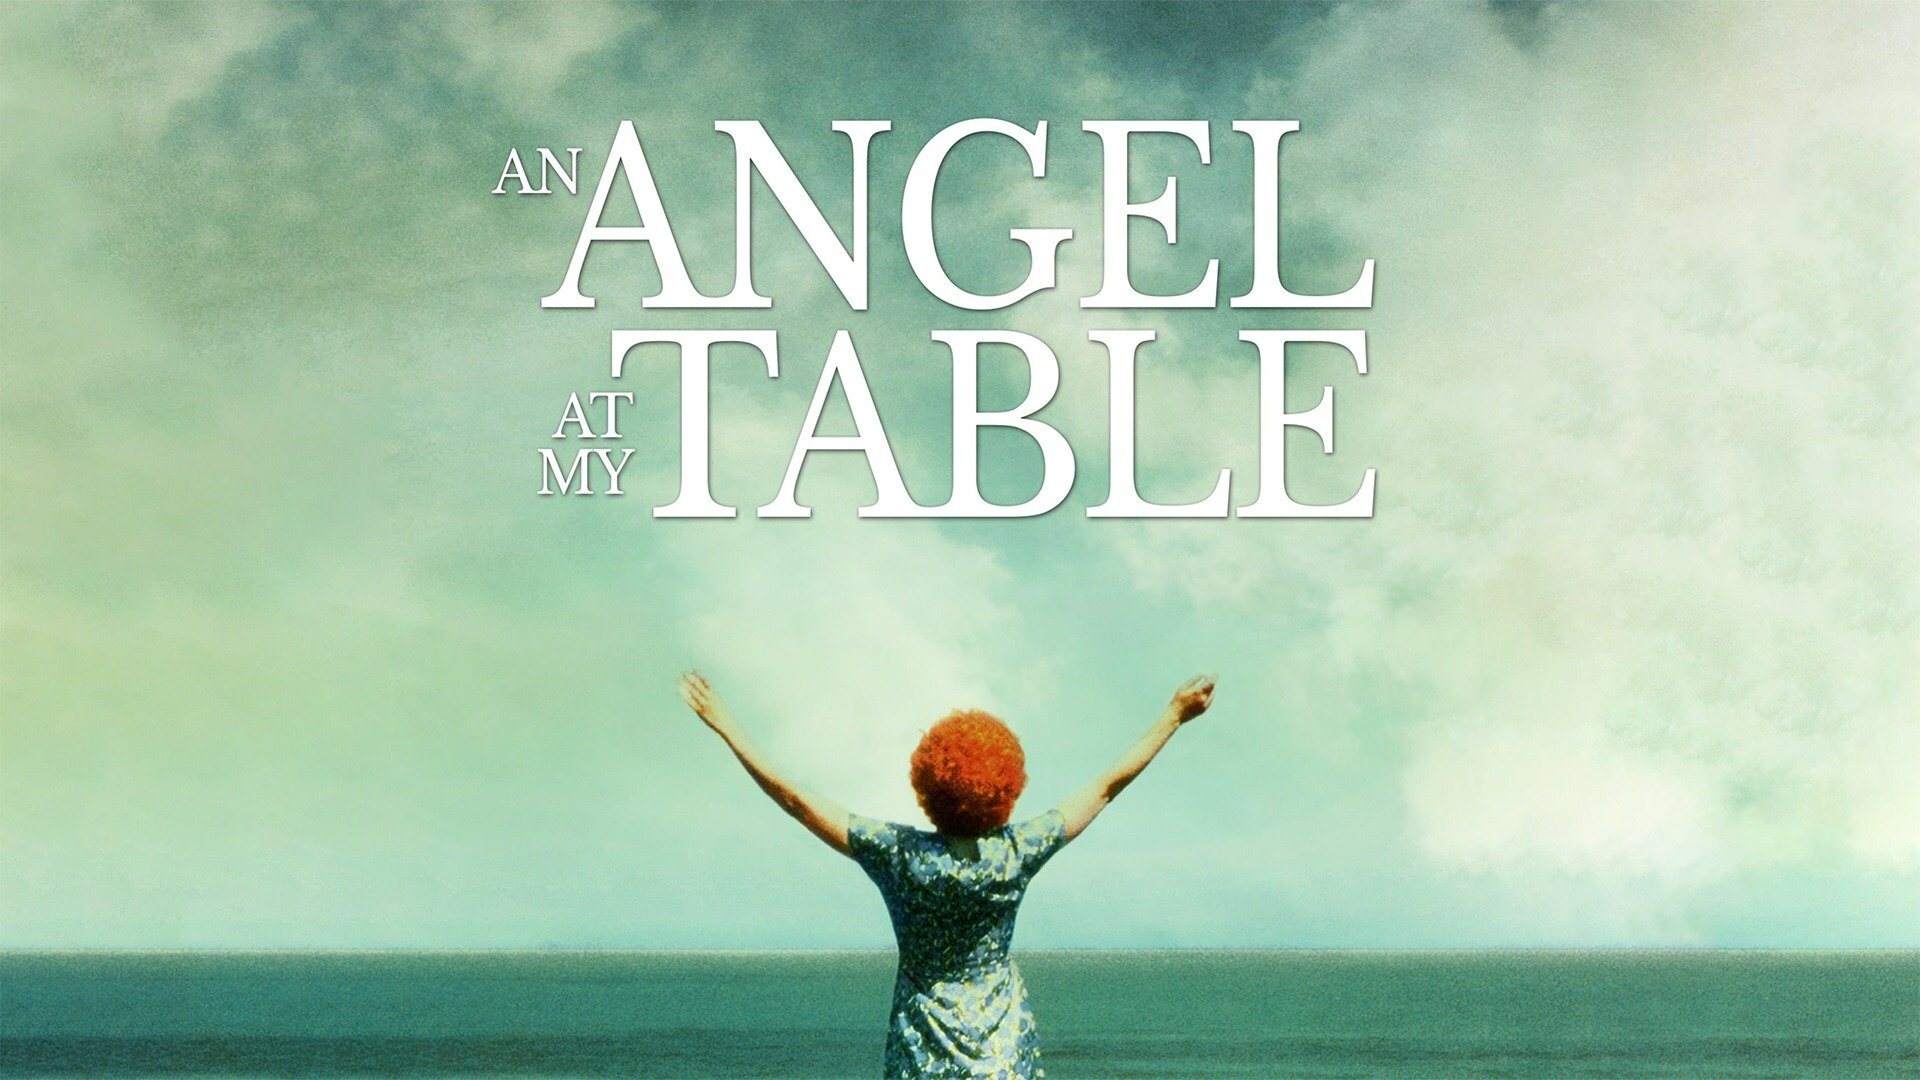 41-facts-about-the-movie-an-angel-at-my-table